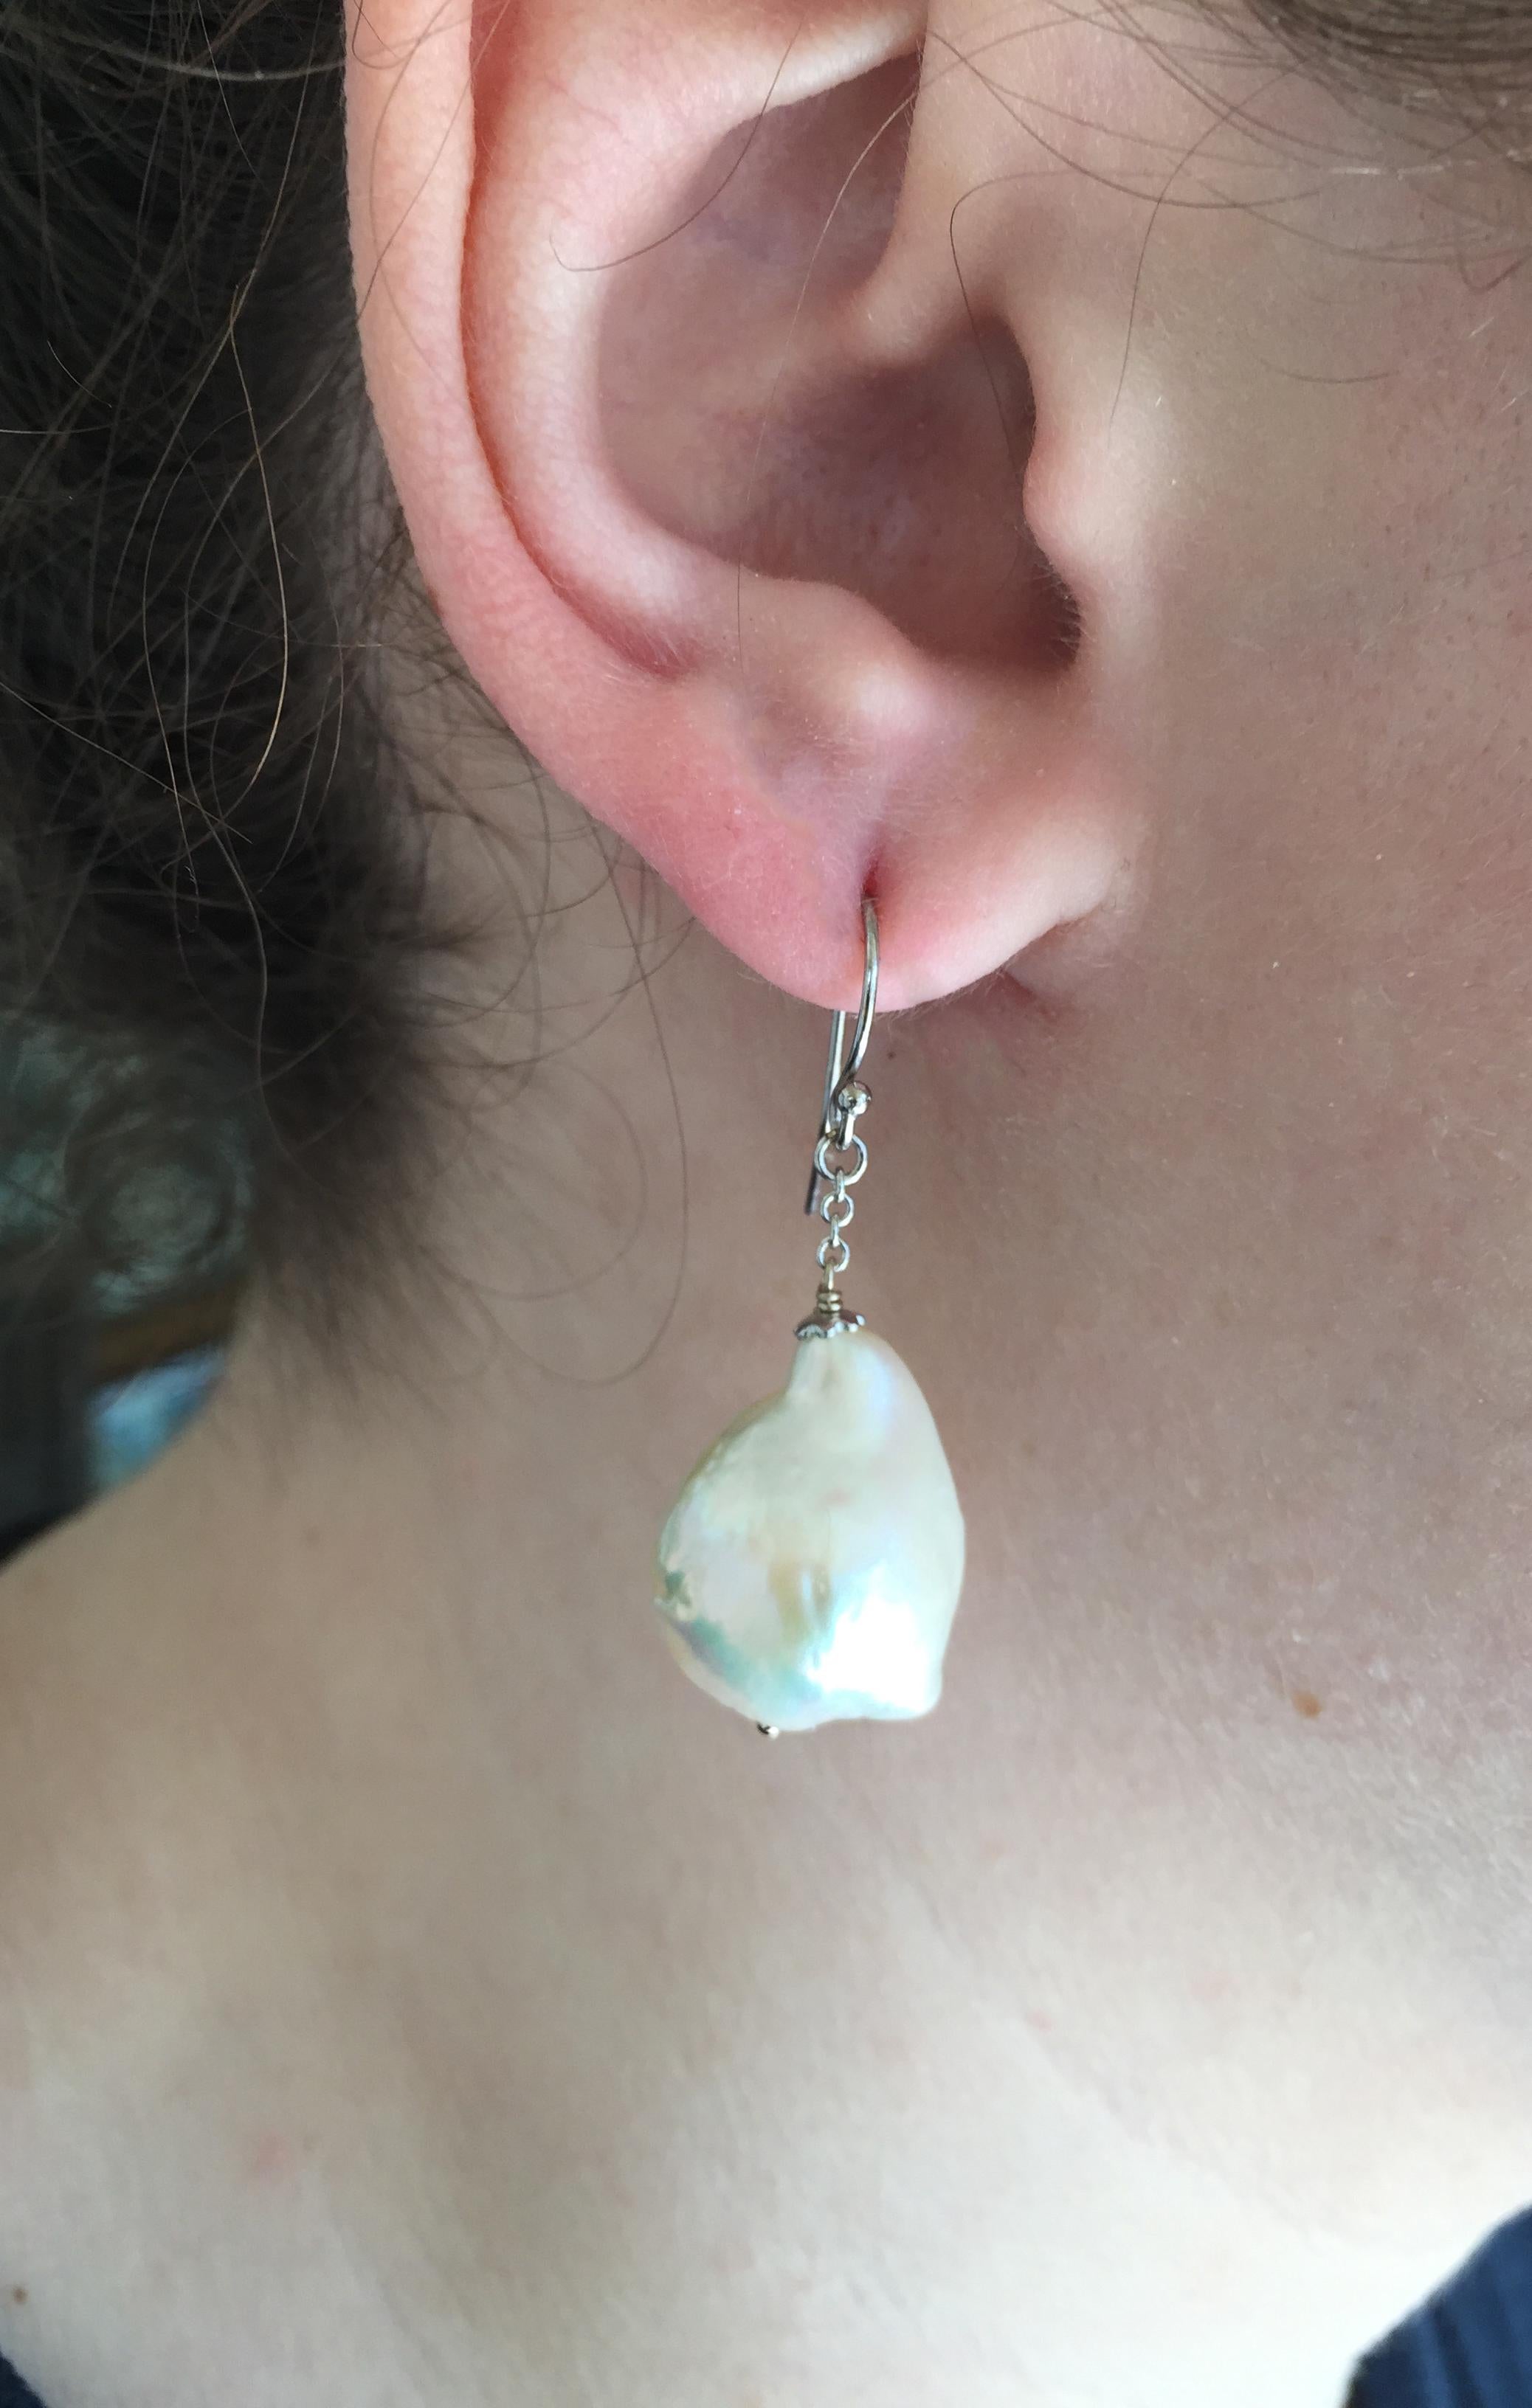 These large white baroque pearl dangle earrings with 14k white gold chain and hook are stunning. The tear drop white baroque pearl is effervescent and shimmers in the light. Highlighting the pearl's beauty is a 14k white gold chain and hook. The